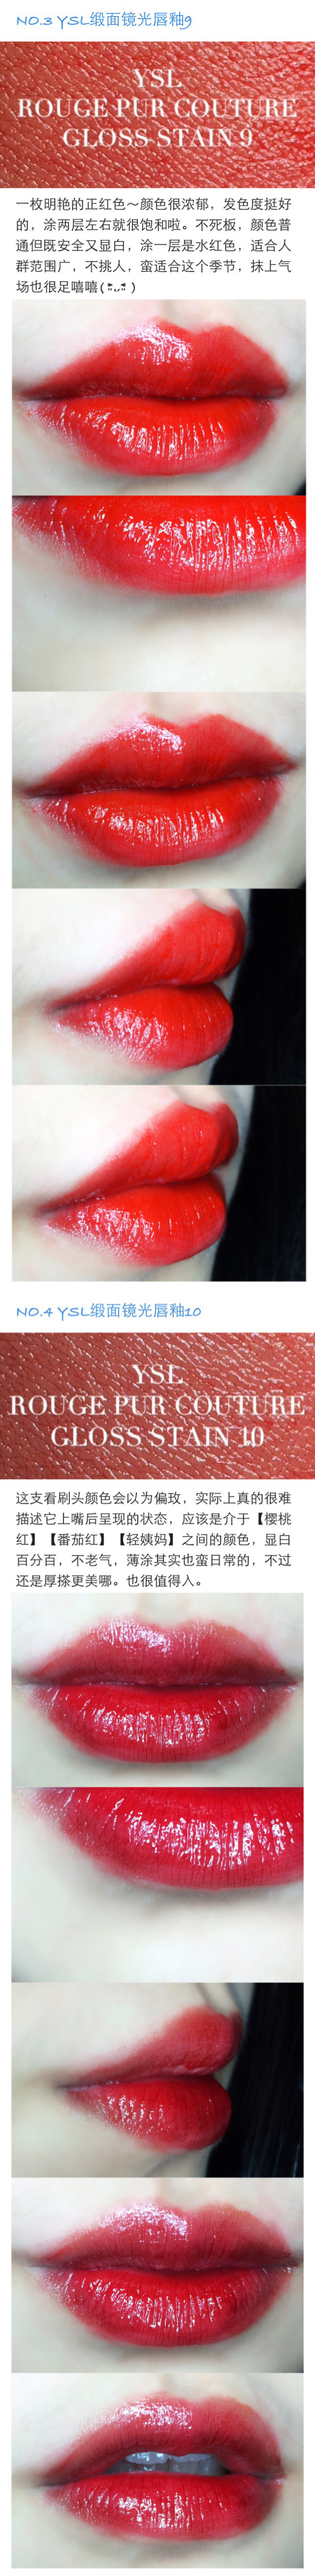 YSL ROUGE PUR COUTURE GLOSS STAIN 缎面镜光唇釉5/7/9/10/11/12/28/31/301试色合集